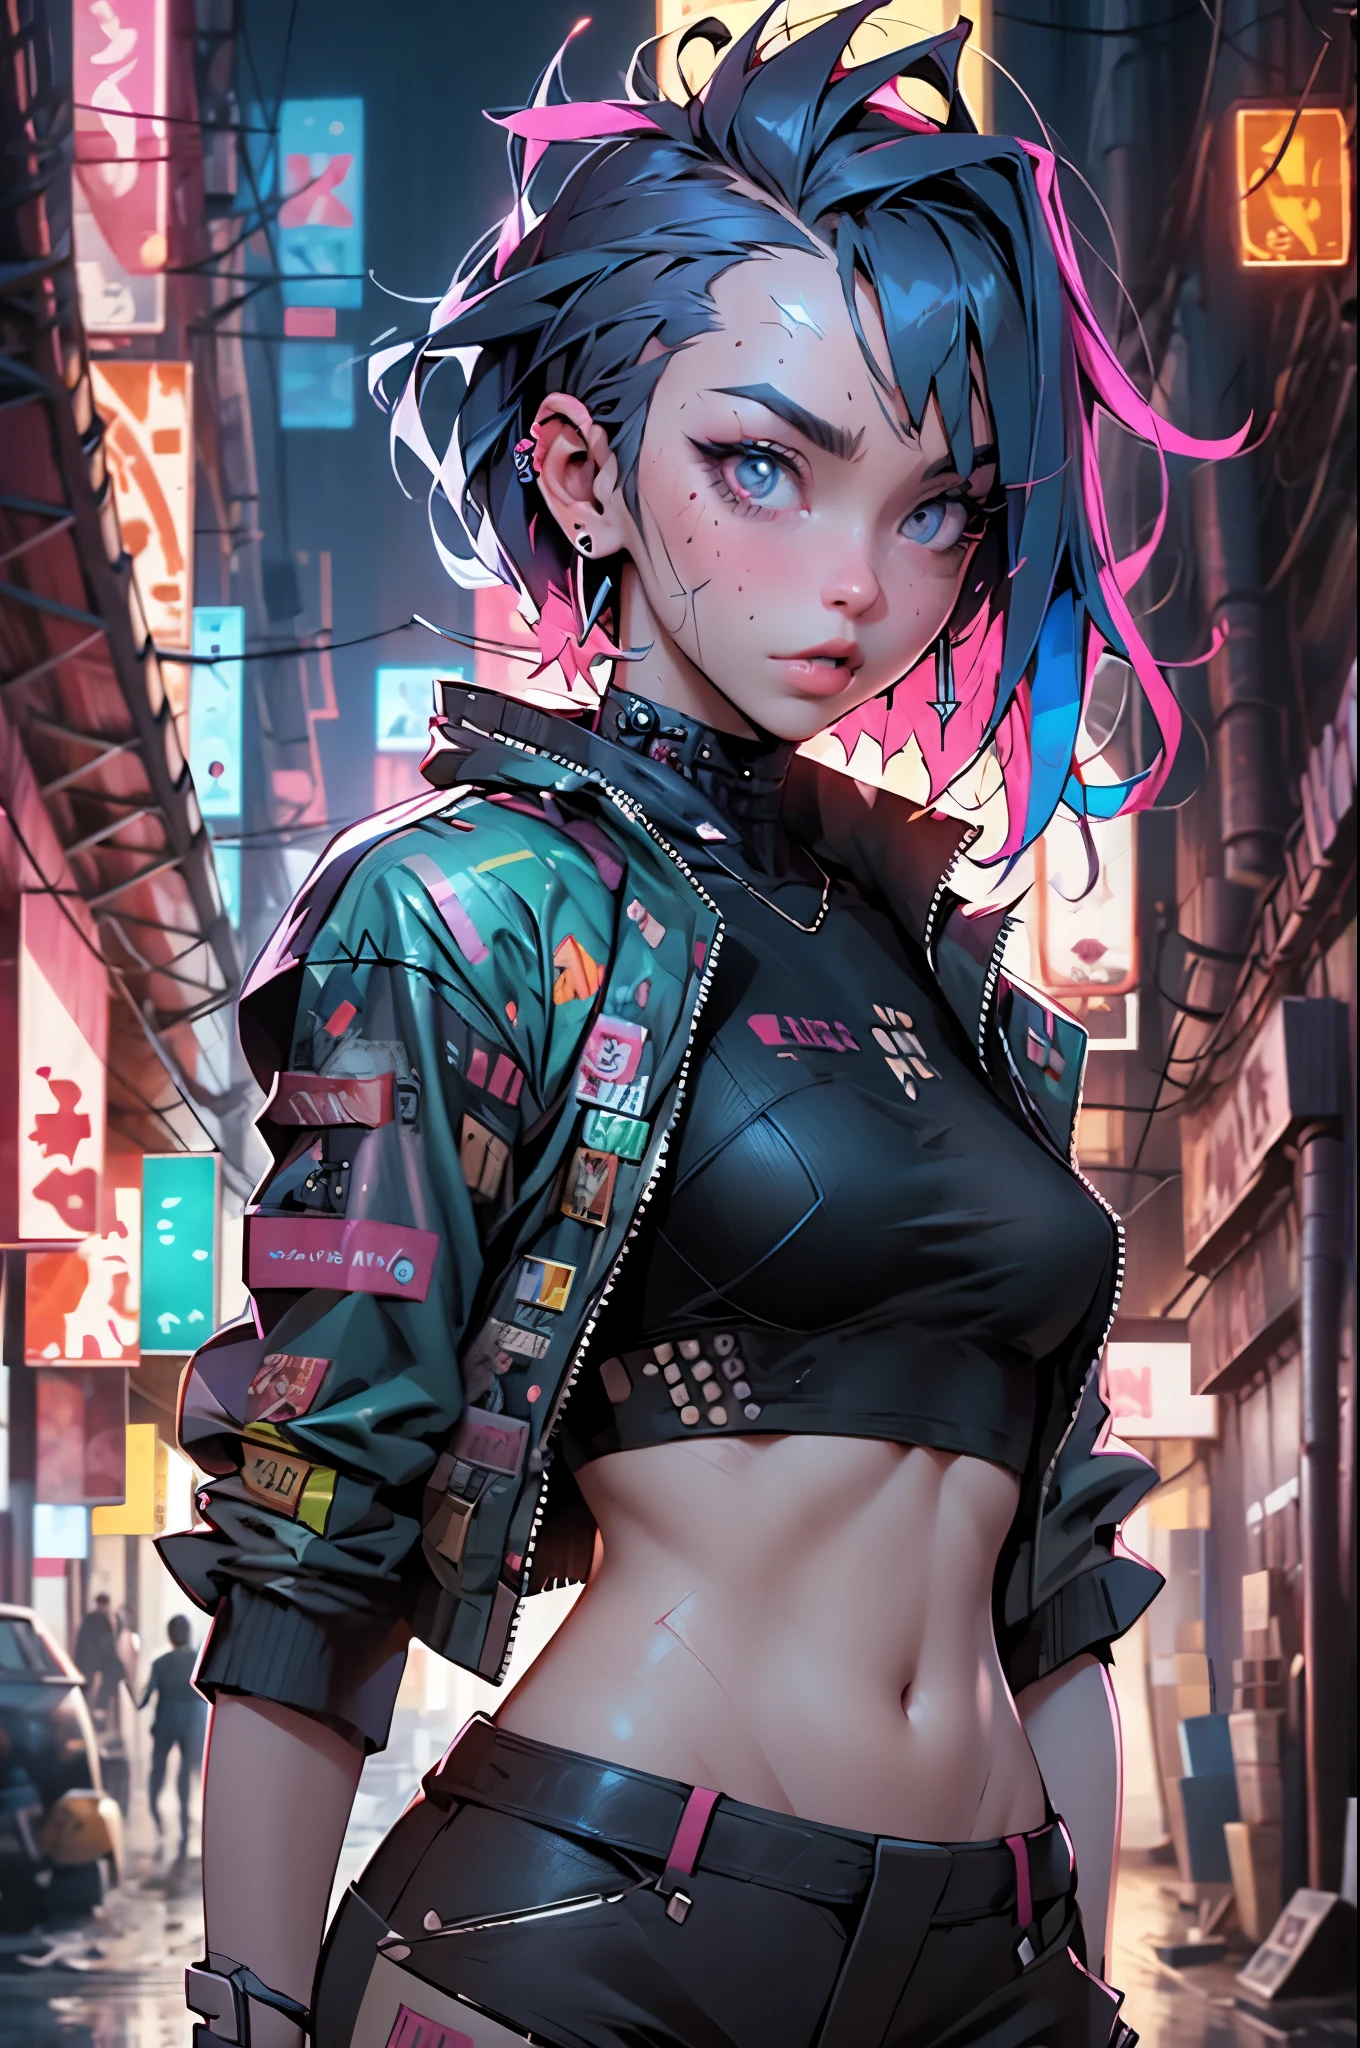 ((best quality)), ((masterpiece)), (highly detailed body and face:1.3), 3D, Beautiful (cyberpunk:1.3) Beautiful young man with hair shaved on the sides and a petrol blue mohawk, VERY DETAILED AND BRIGHT, ((with guns in hands)), (((futuristic Mad Max movie style background))), (((pink and cyan neon lights at night))), night image, at night, 32k